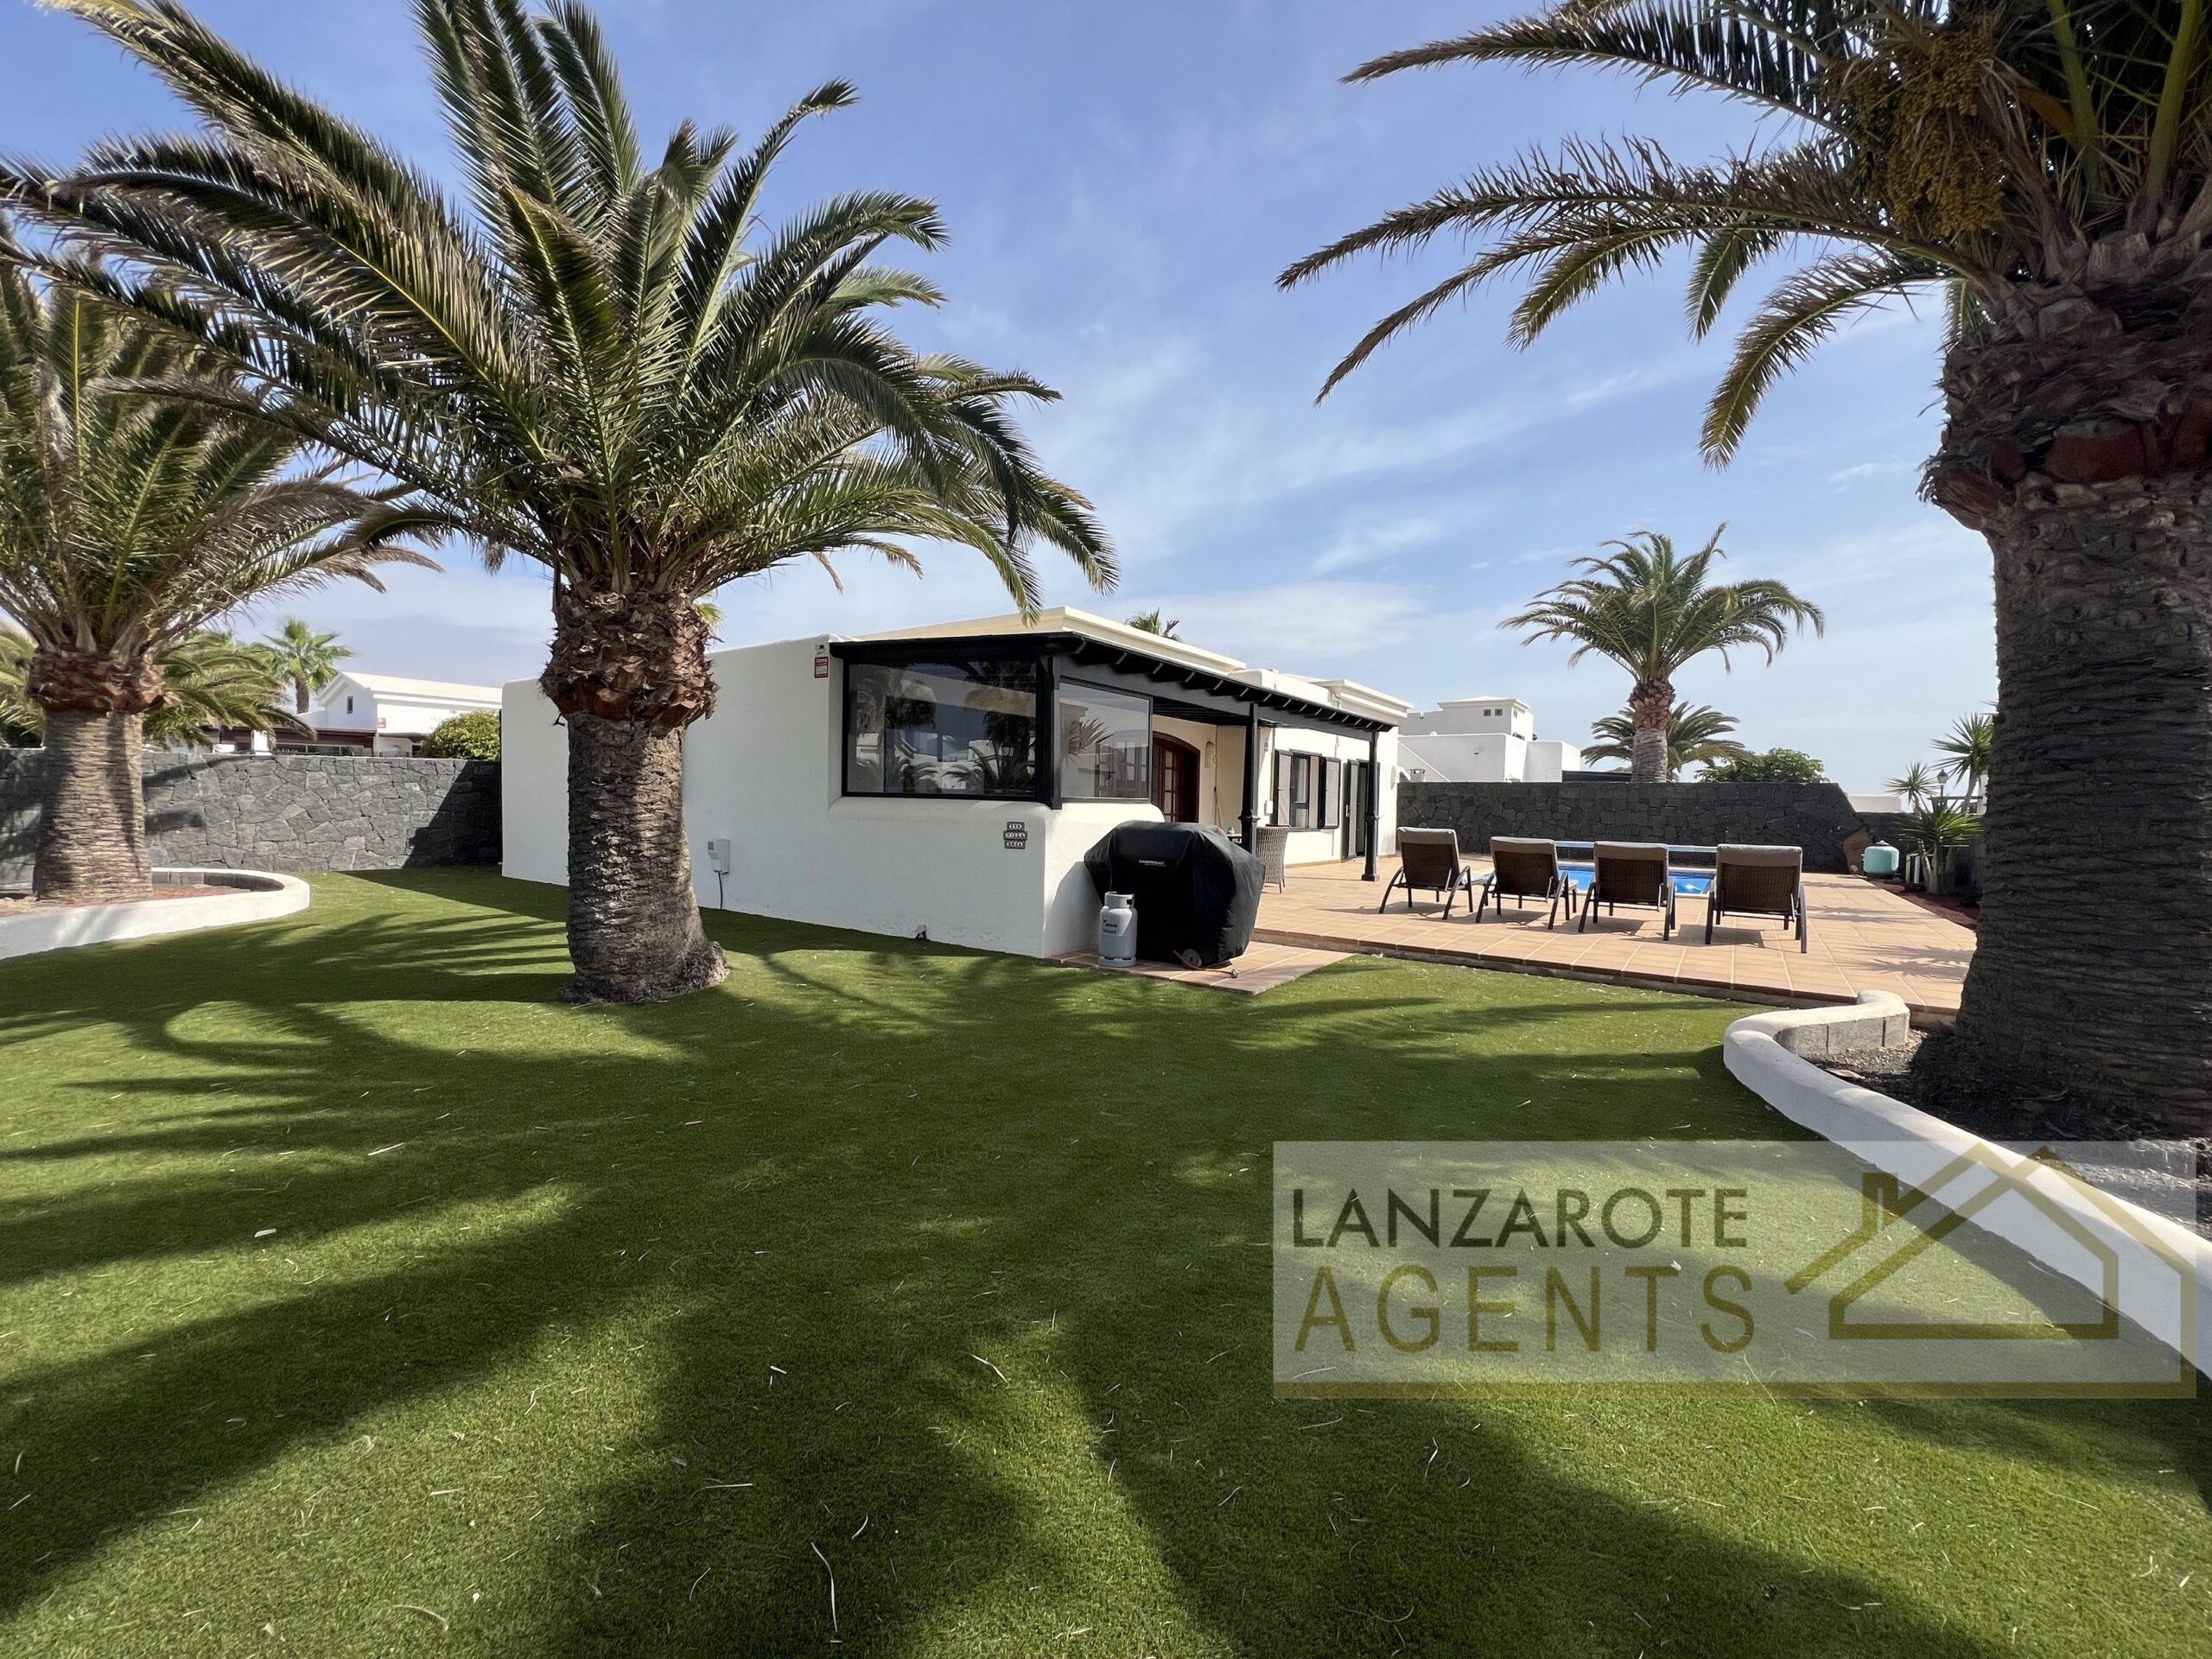 Immaculate Detached 2 Bedroom Villa with Private Pool, A/C and Large Terrace and Garden in Playa Blanca